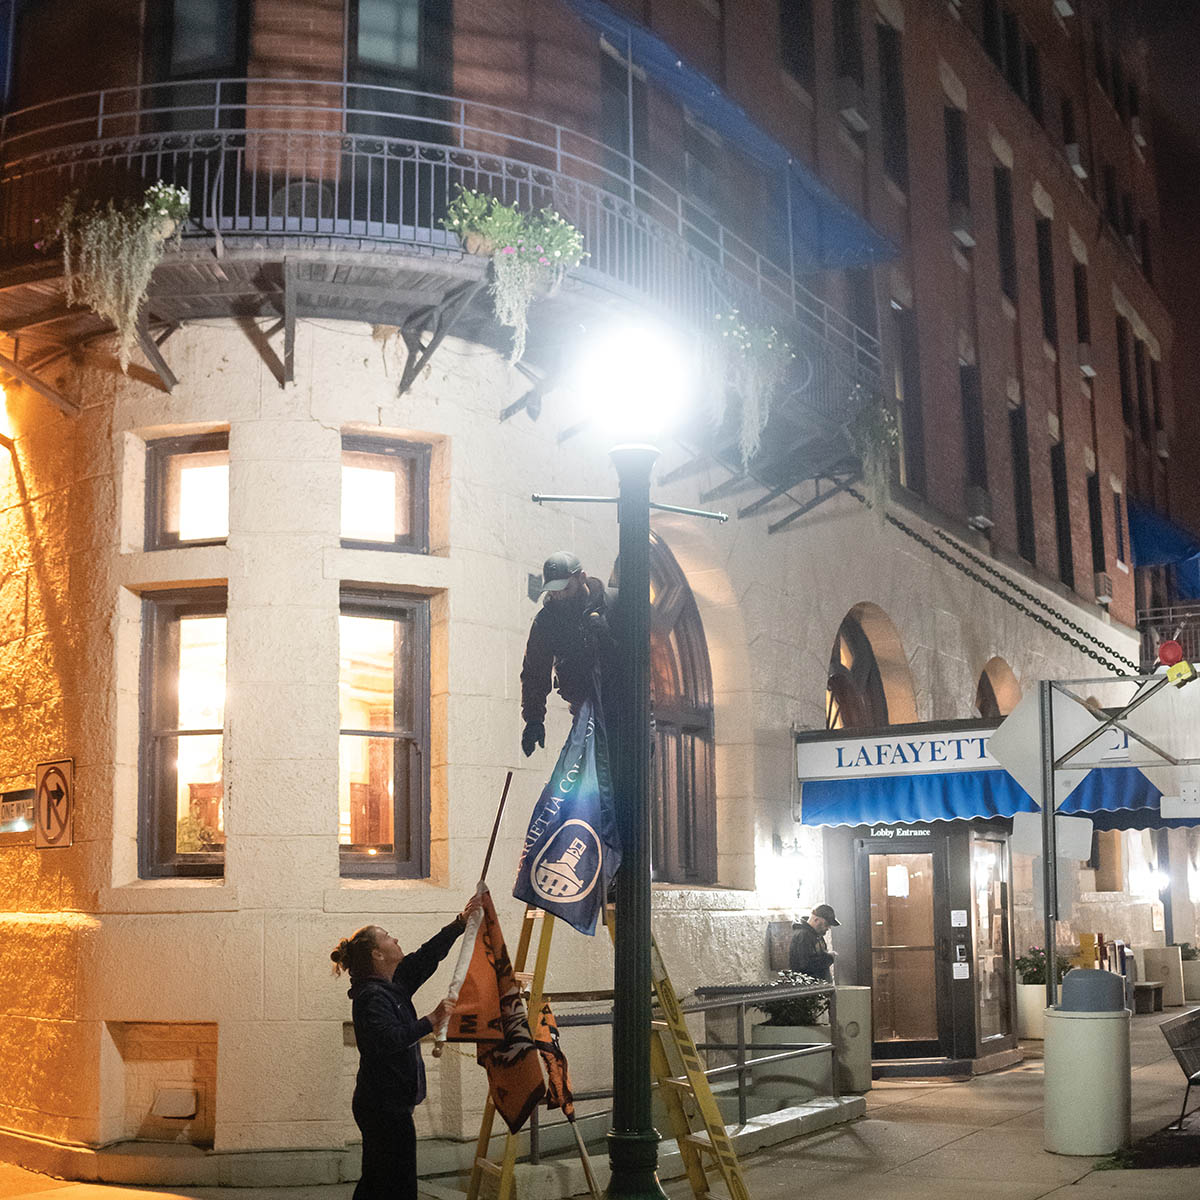 Before dawn, several times each year, Marietta employees volunteer to put up Marietta College flags throughout the downtown district to put Pioneer Pride on full display in the community